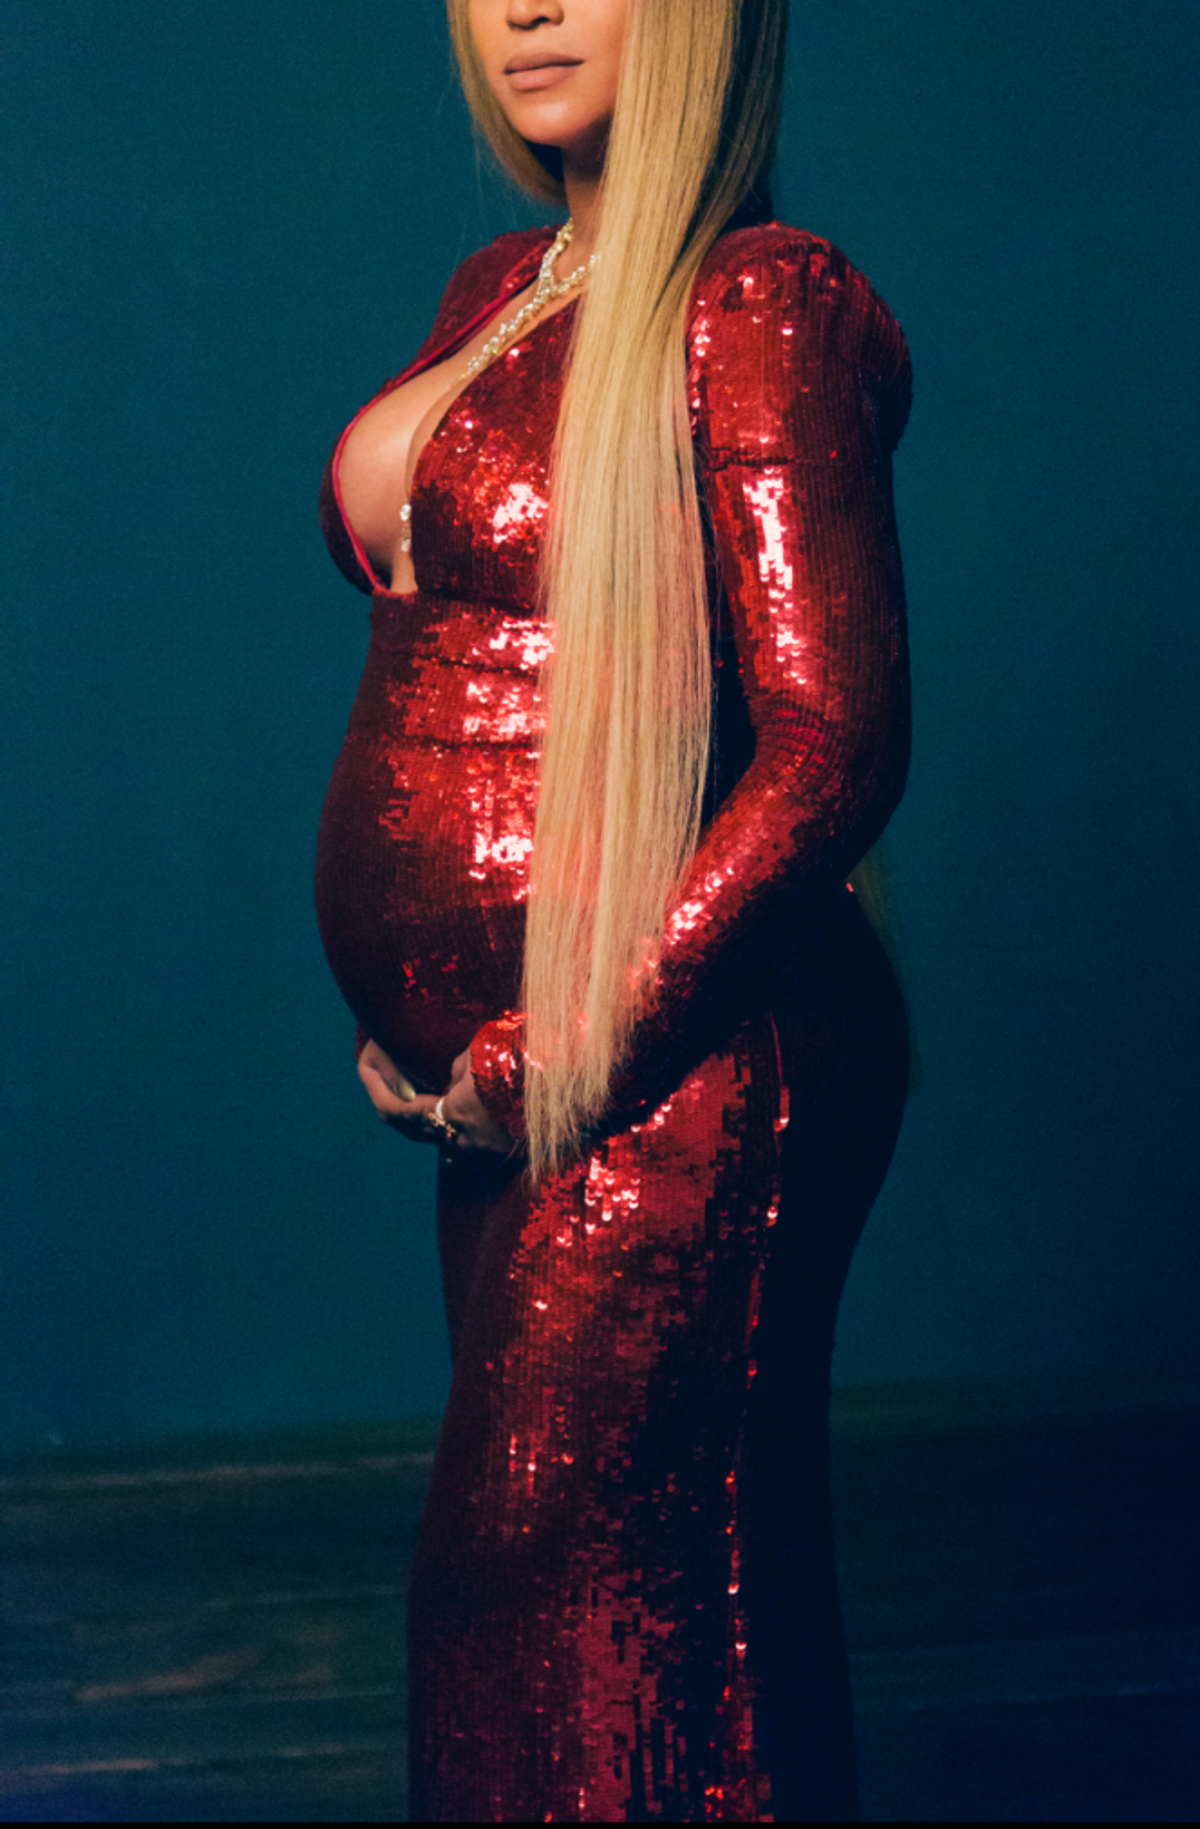 Why Beyoncé​ Has The Right To Be Happy About Her Pregnancy